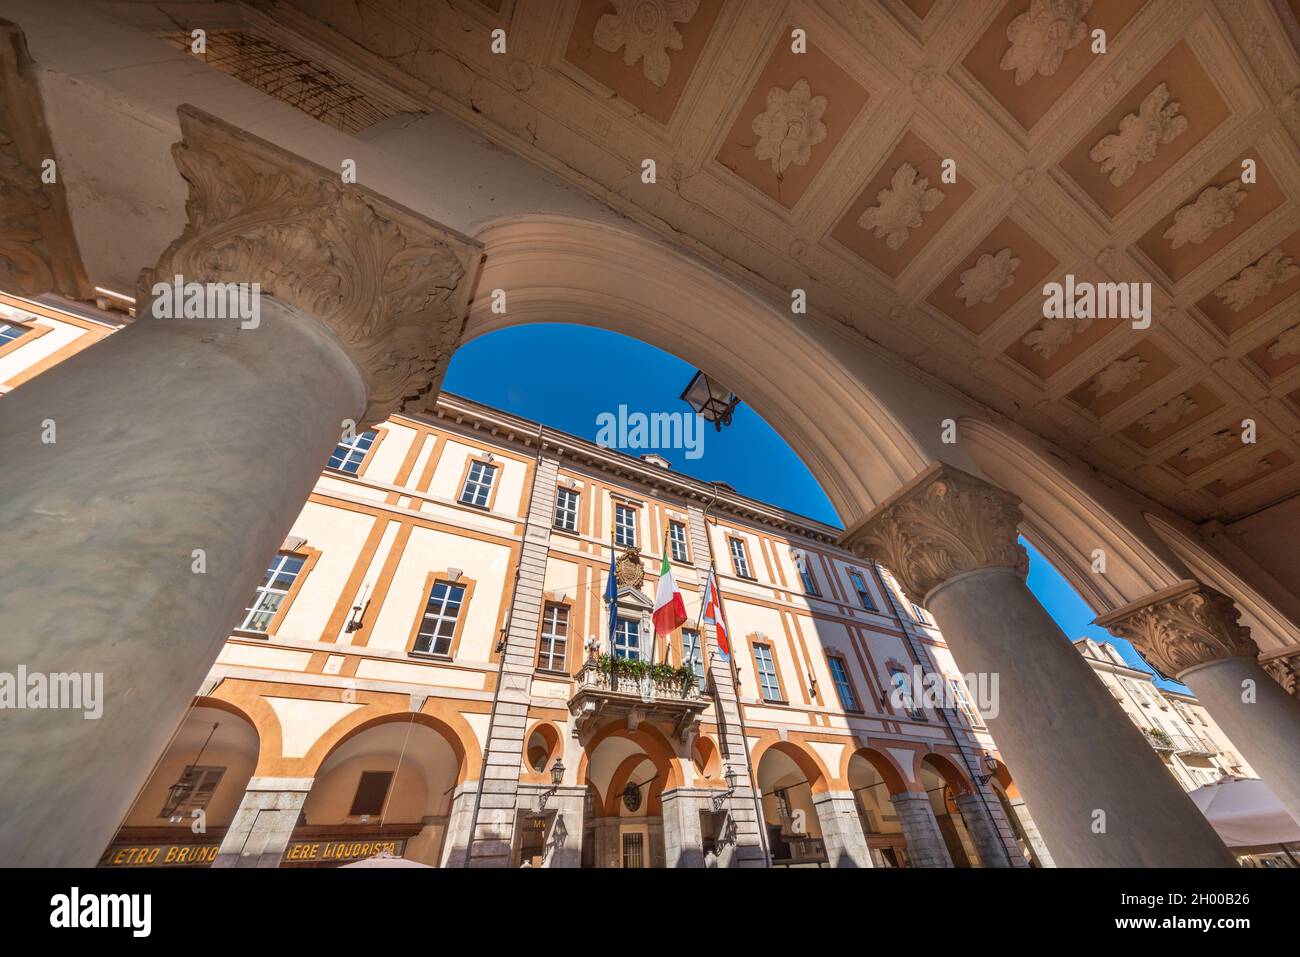 Cuneo, Piedmont, Italy - October 6, 2021: the town hall seen from the arches of the historic artistic arcades (Portici di Cuneo) in Via Roma Stock Photo